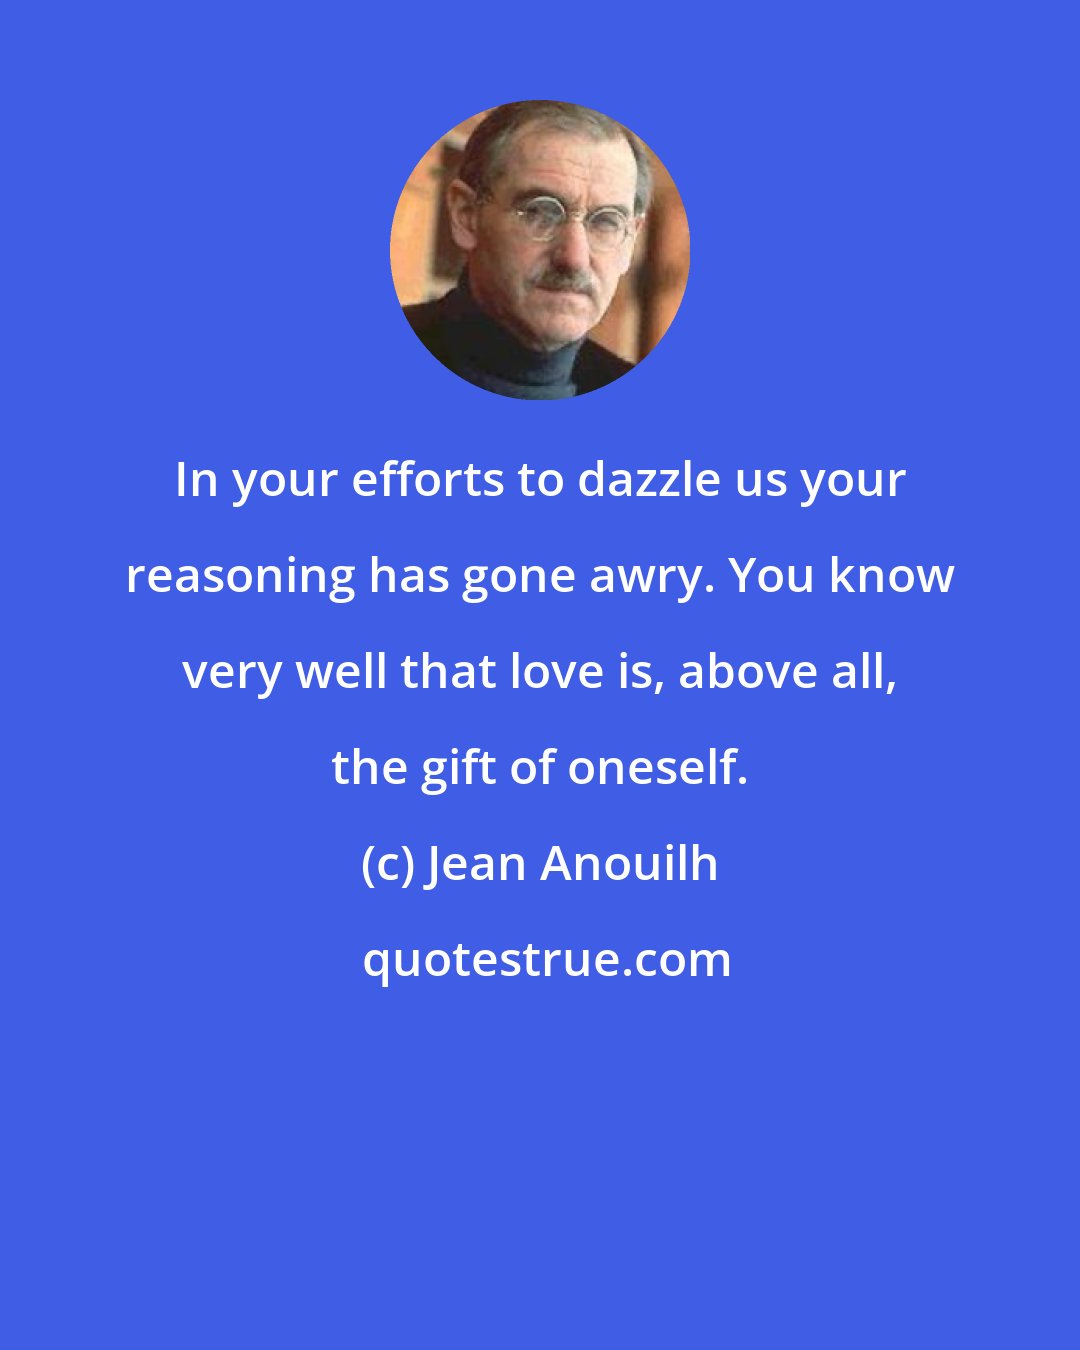 Jean Anouilh: In your efforts to dazzle us your reasoning has gone awry. You know very well that love is, above all, the gift of oneself.